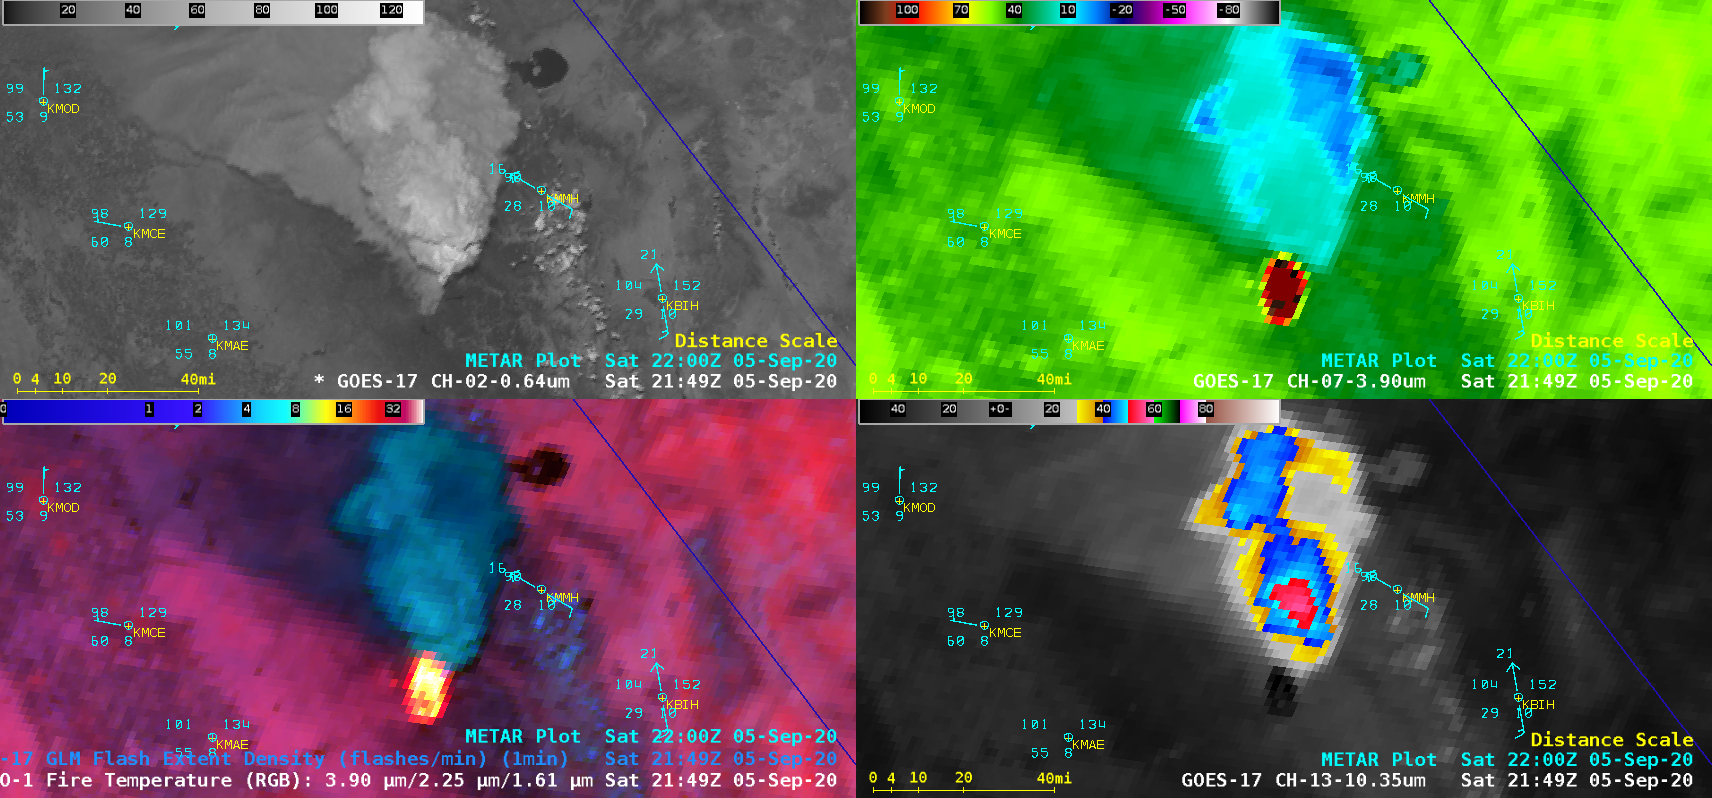 GOES-17 “Red” Visible (0.64 µm, top left), GOES-17 Shortwave Infrared (3.9 µm, top right), GOES-17 Fire Temperature RGB + GLM Flash Extent Density(bottom left) and 